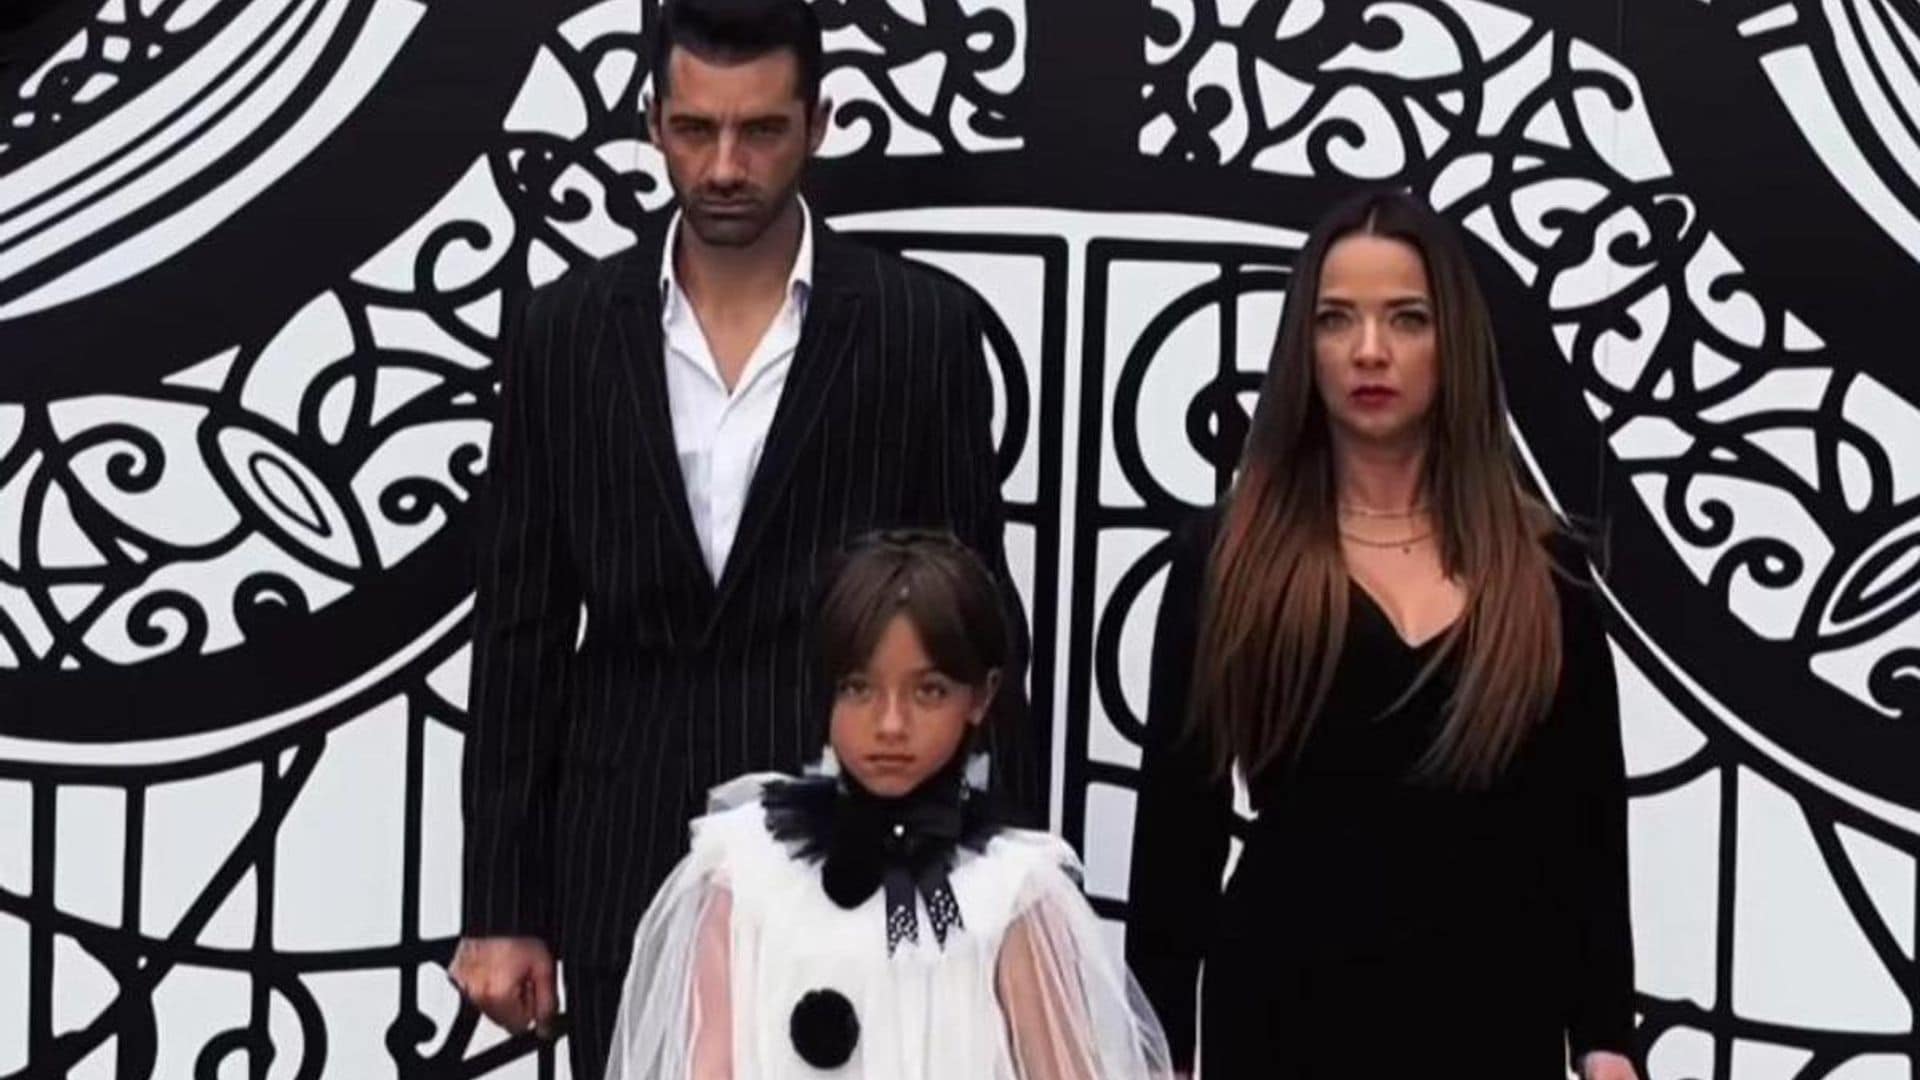 Adamari Lopez’ daughter dresses up as Wednesday Addams for her birthday